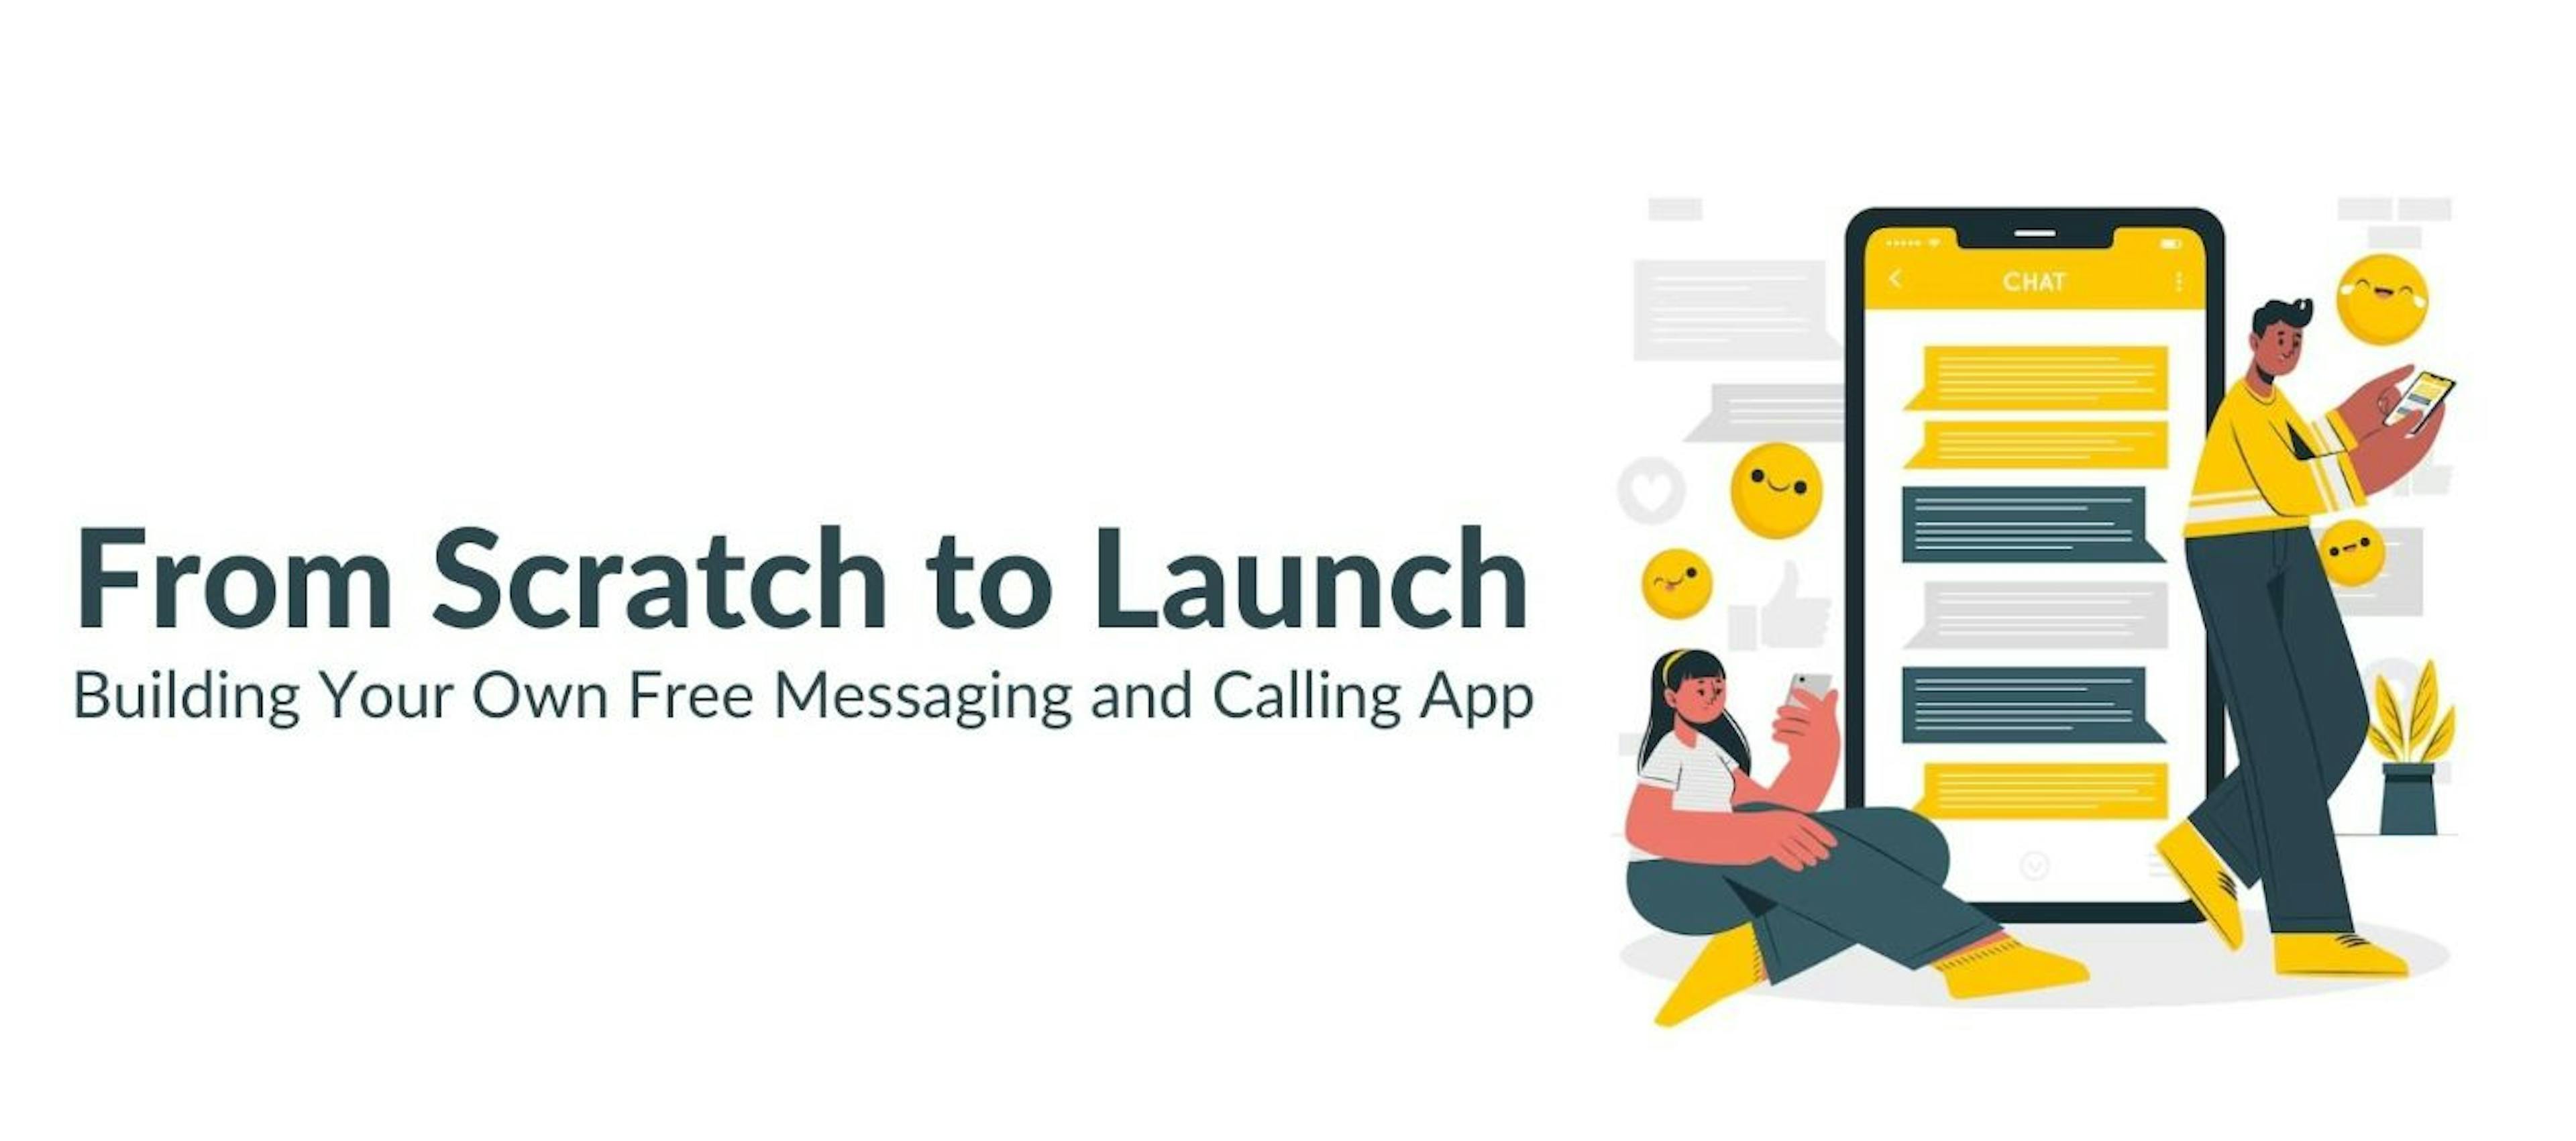 featured image - From Scratch to Launch: Building a Free Messaging and Calling App